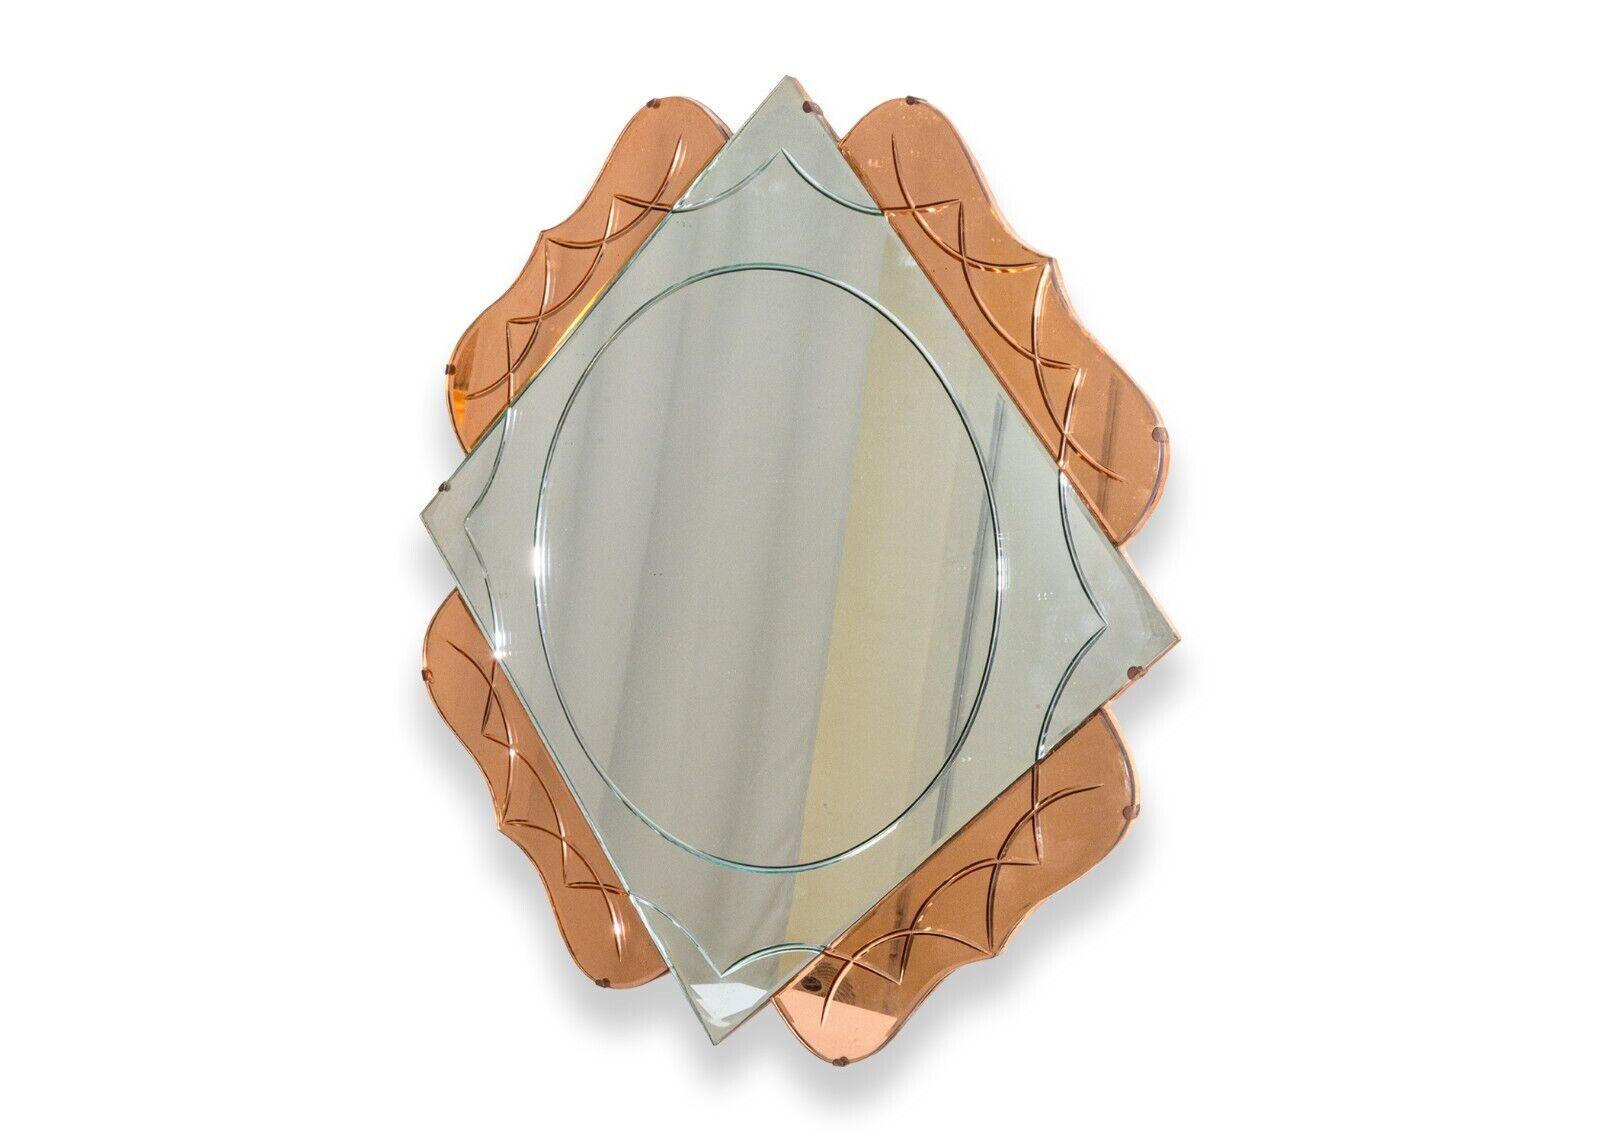 An art deco two tone pink hanging mirror. This is a very unique accent mirror. This piece features a mostly square design with rounded accents to the diamond shape. This mirror is wall hanging via a chain attached to the wooden frame on the